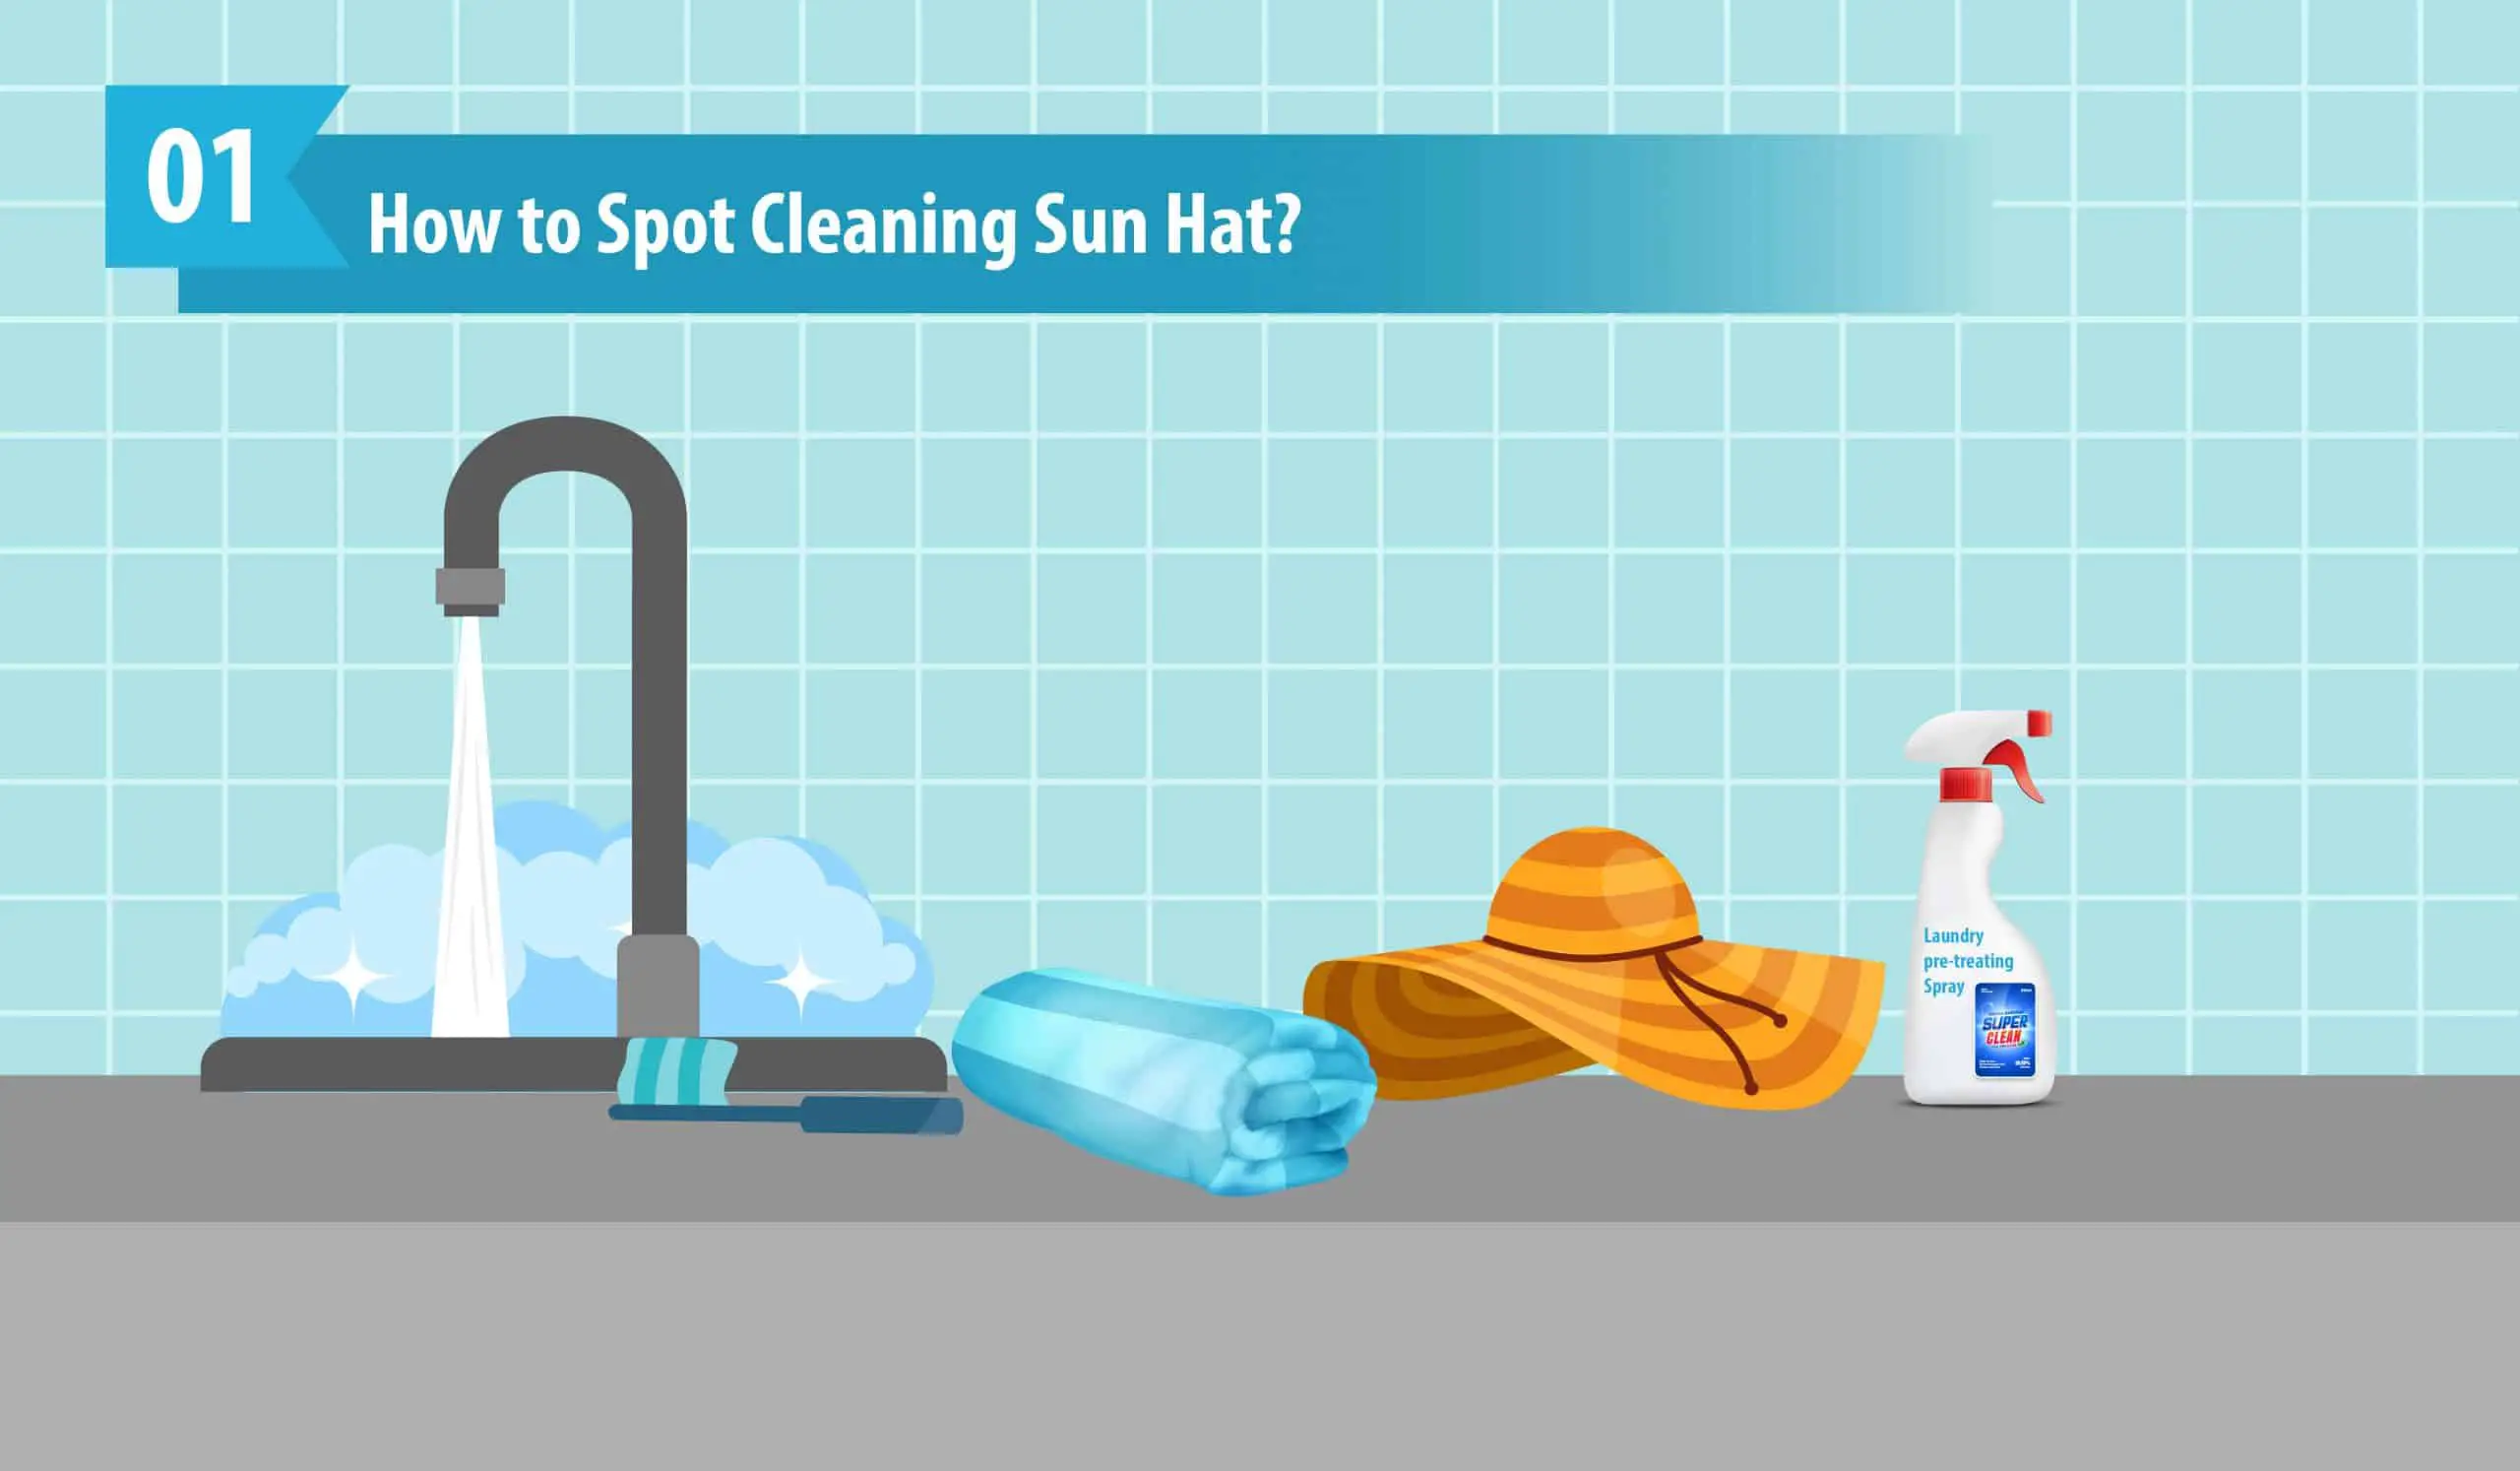 How to Spot Cleaning Sun Hat